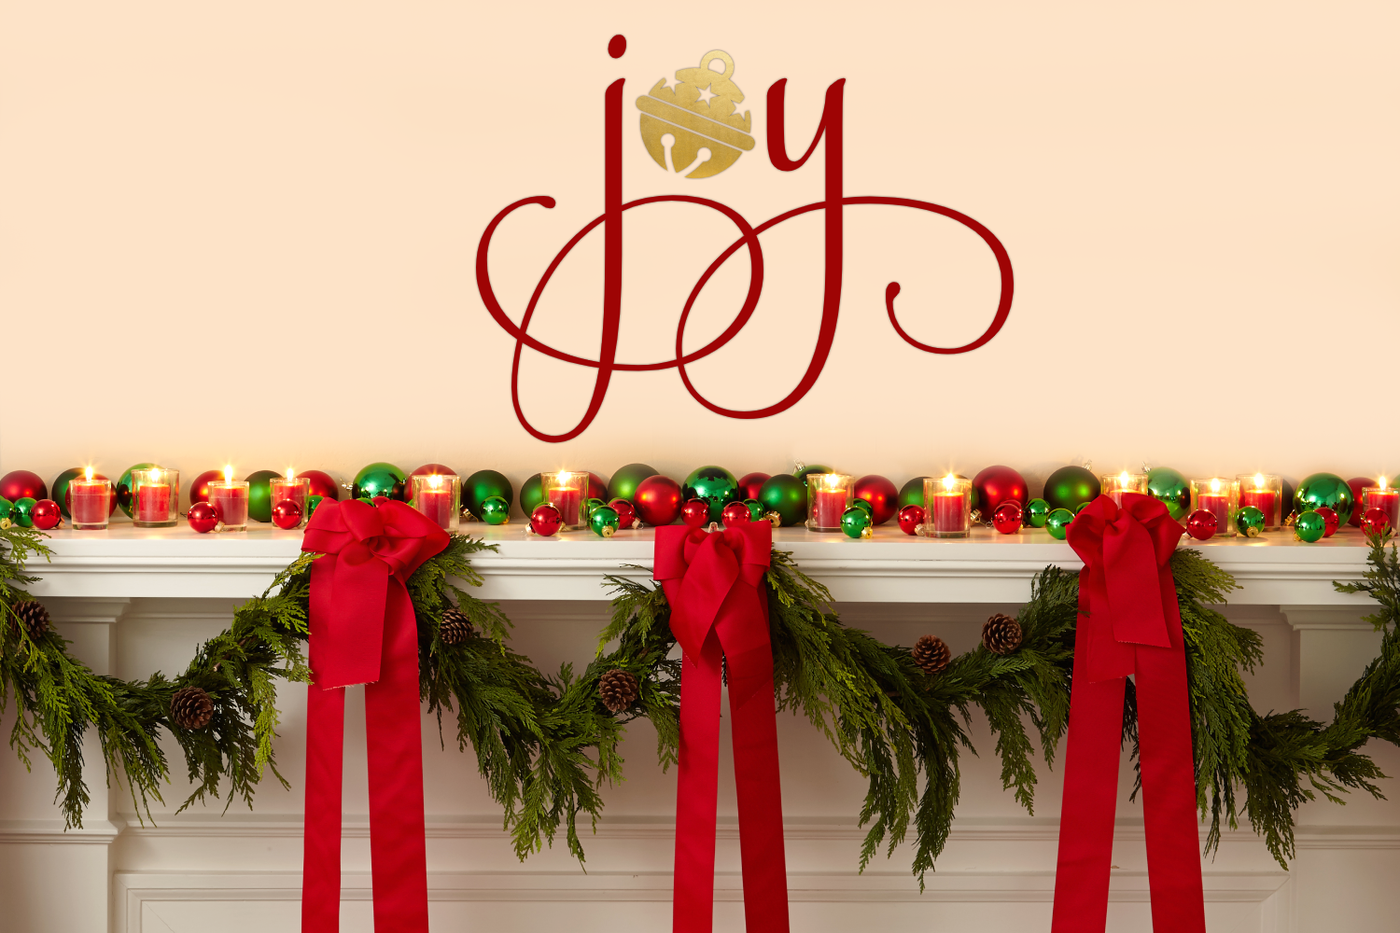 A mantle decorated for Christmas. Above the mantle on the wall is the word "joy" in elegant script. In place of the O is a round bell.